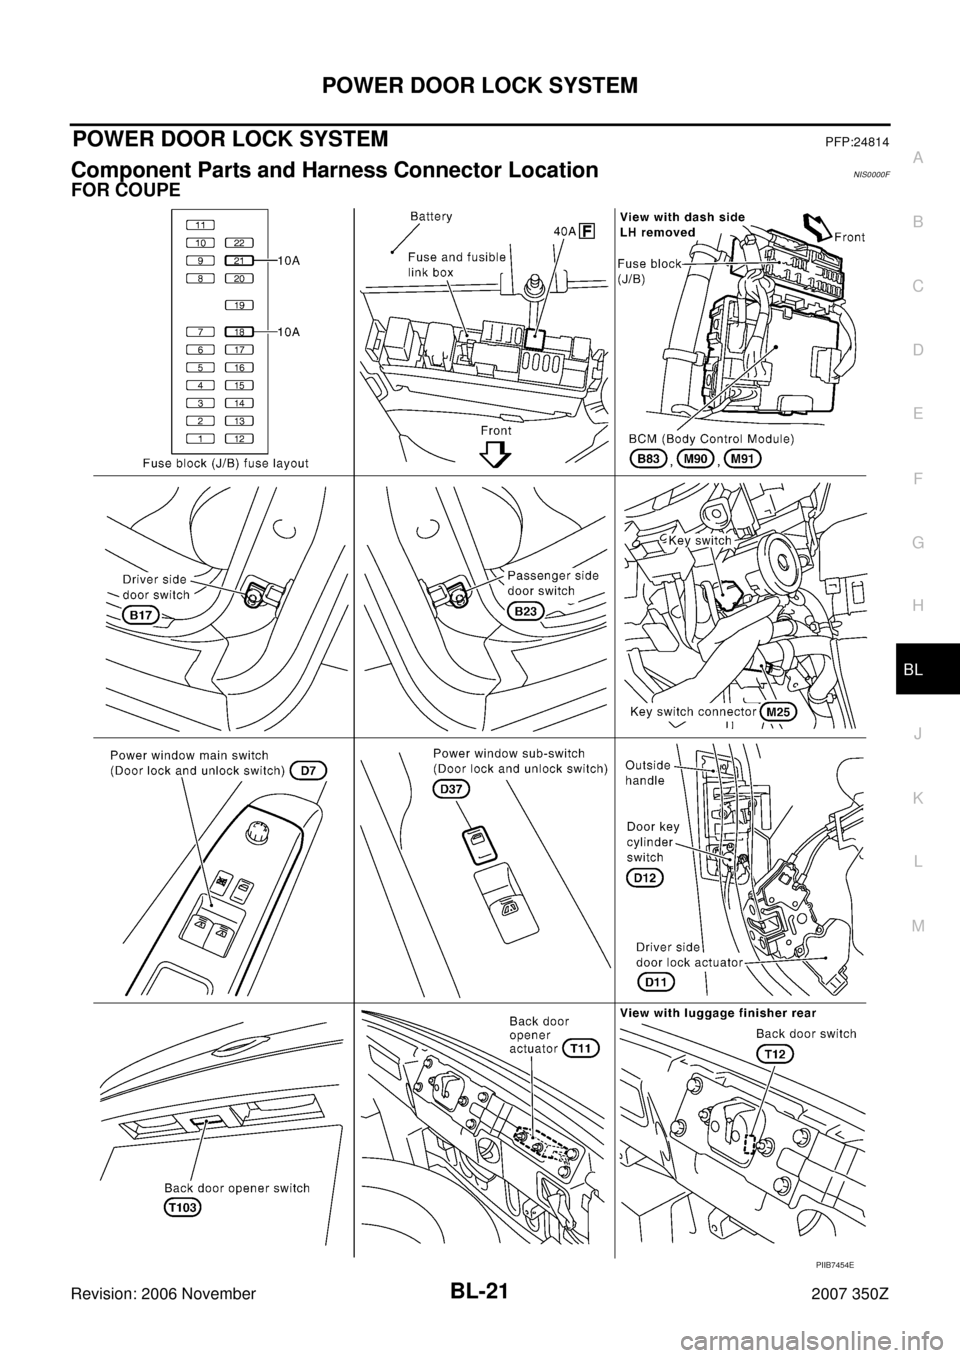 NISSAN 350Z 2007 Z33 Body, Lock And Security System Owners Manual POWER DOOR LOCK SYSTEM
BL-21
C
D
E
F
G
H
J
K
L
MA
B
BL
Revision: 2006 November2007 350Z
POWER DOOR LOCK SYSTEMPFP:24814
Component Parts and Harness Connector LocationNIS0000F
FOR COUPE
PIIB7454E 